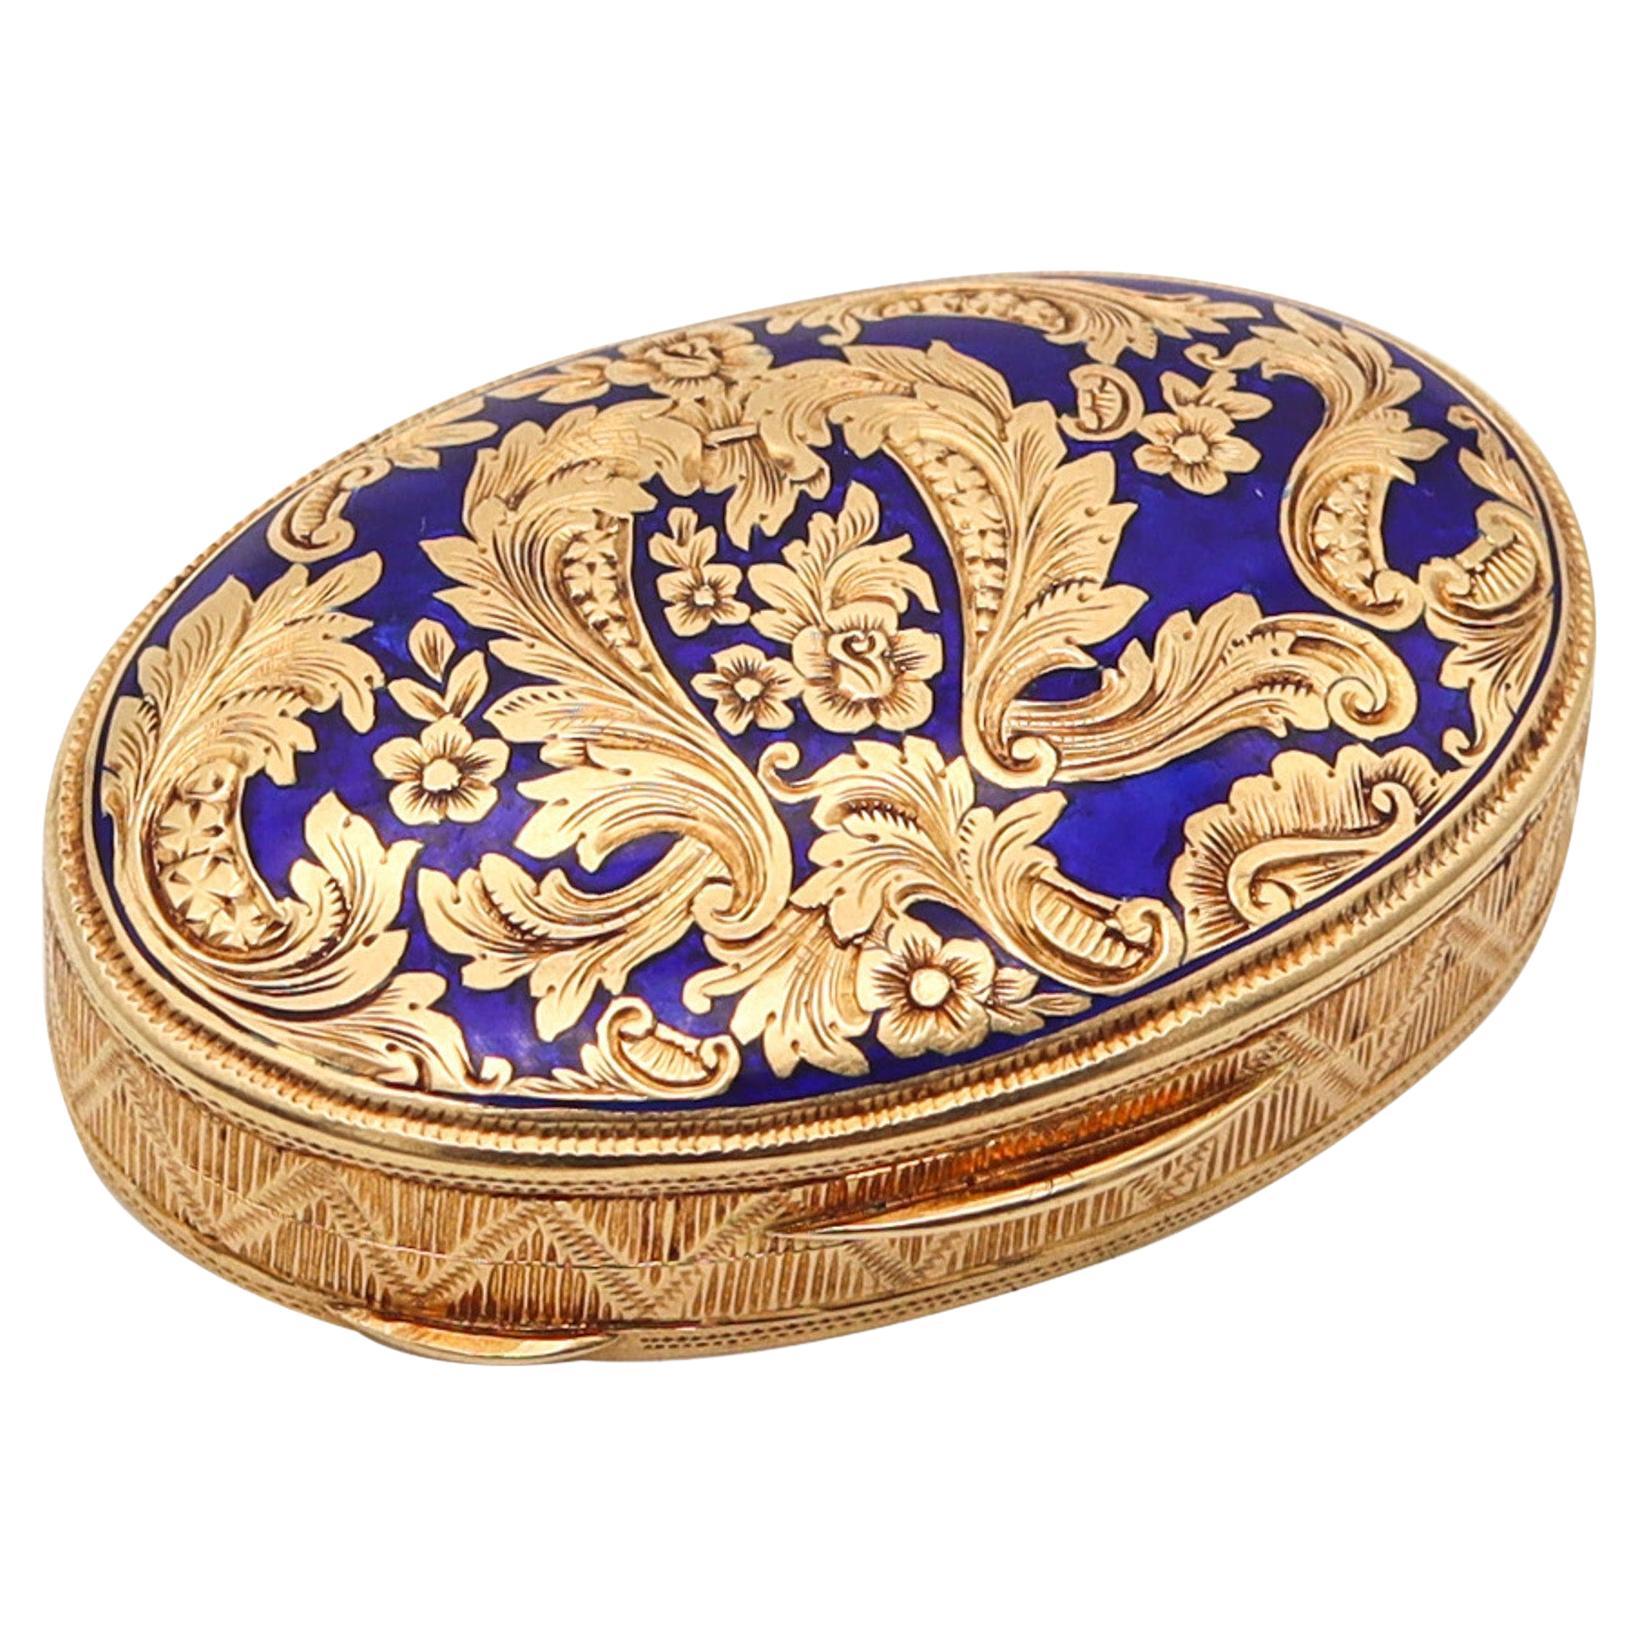 European 1930 Baroque Revival Blue Enameled Pill Box In Solid 18Kt yellow Gold For Sale